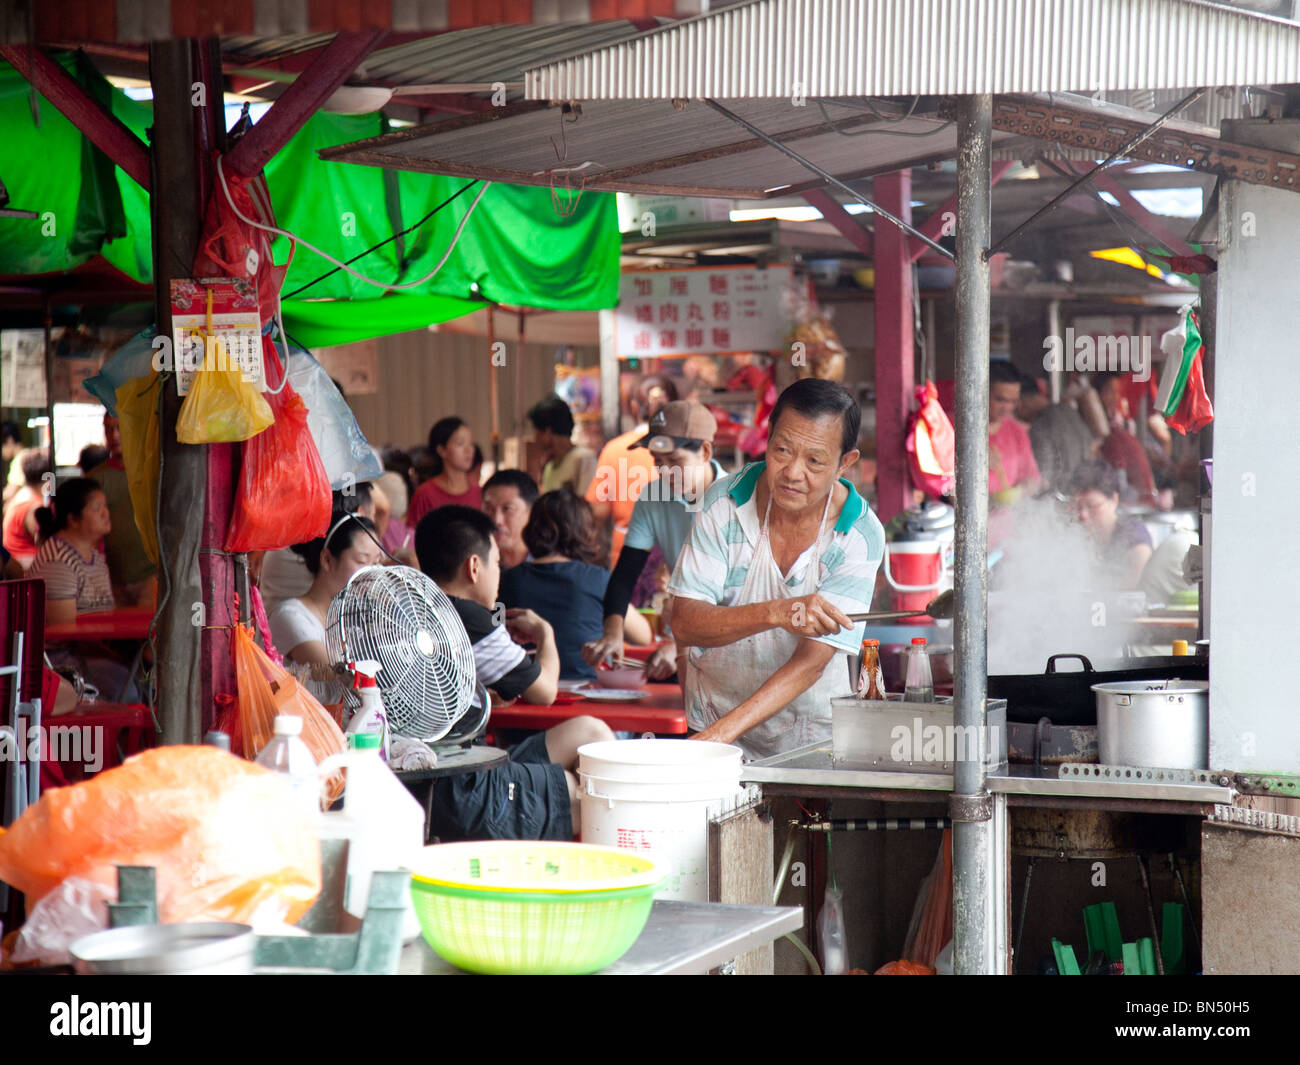 A street Hawker in the Imbi Road Chinese Market in Kuala Lampur Malaysia cooks Char Kuey Teow -  noodles with cockles Stock Photo